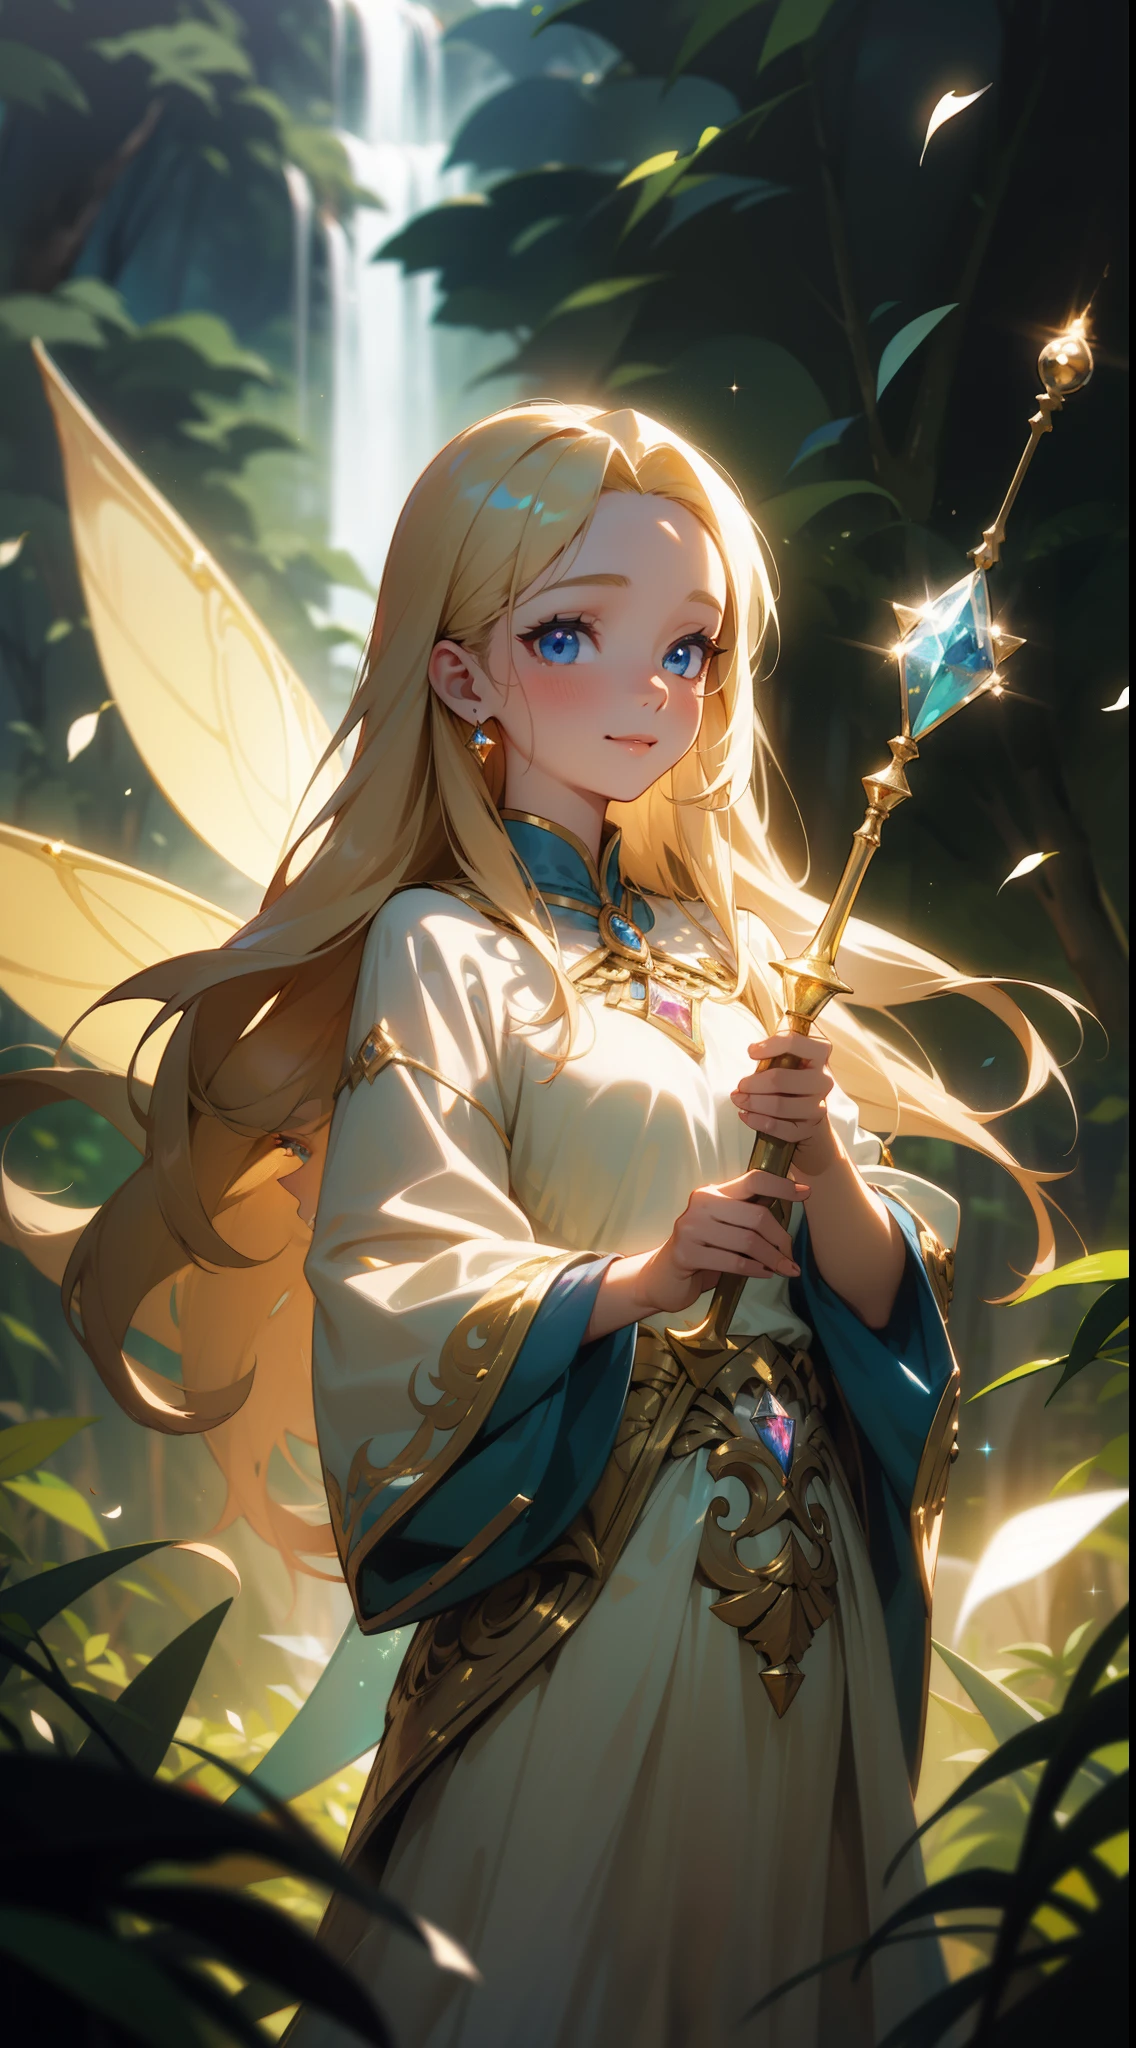 ((masterpiece)), best quality, 8k, high quality, high resolution, super detailed, ultra detailed, photorealistic, magical and finely detailed face and eyes, ultra detailed and detailed skin texture, enchanting eyes, perfect face, 1 girl, flowing golden hair, (enchanted gown), sparkling blue eyes, (fairy wings), (mystical aura), holding a crystal wand, standing in a radiant forest glade, ethereal expression, ((gentle smile)), day, sun-dappled meadow, shimmering waterfall, magical ambiance, (whispering breeze), (soft chimes), since time immemorial, Elara, mystical eyes, "Harry Potter" inspired background.